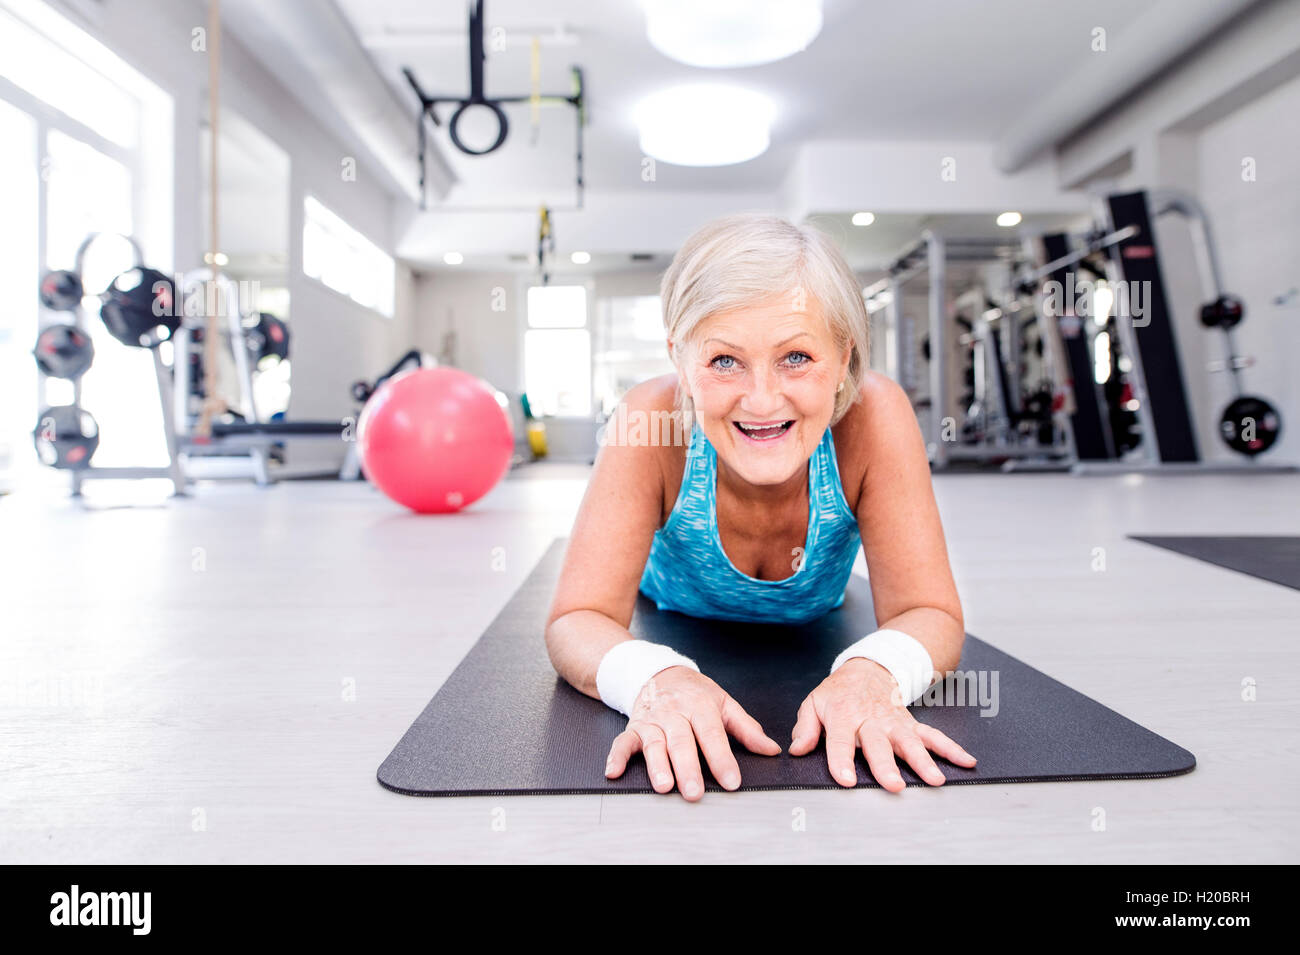 Germany, Duesseldorf, Mature Woman Exercising With Treadmill, Smiling Portrait